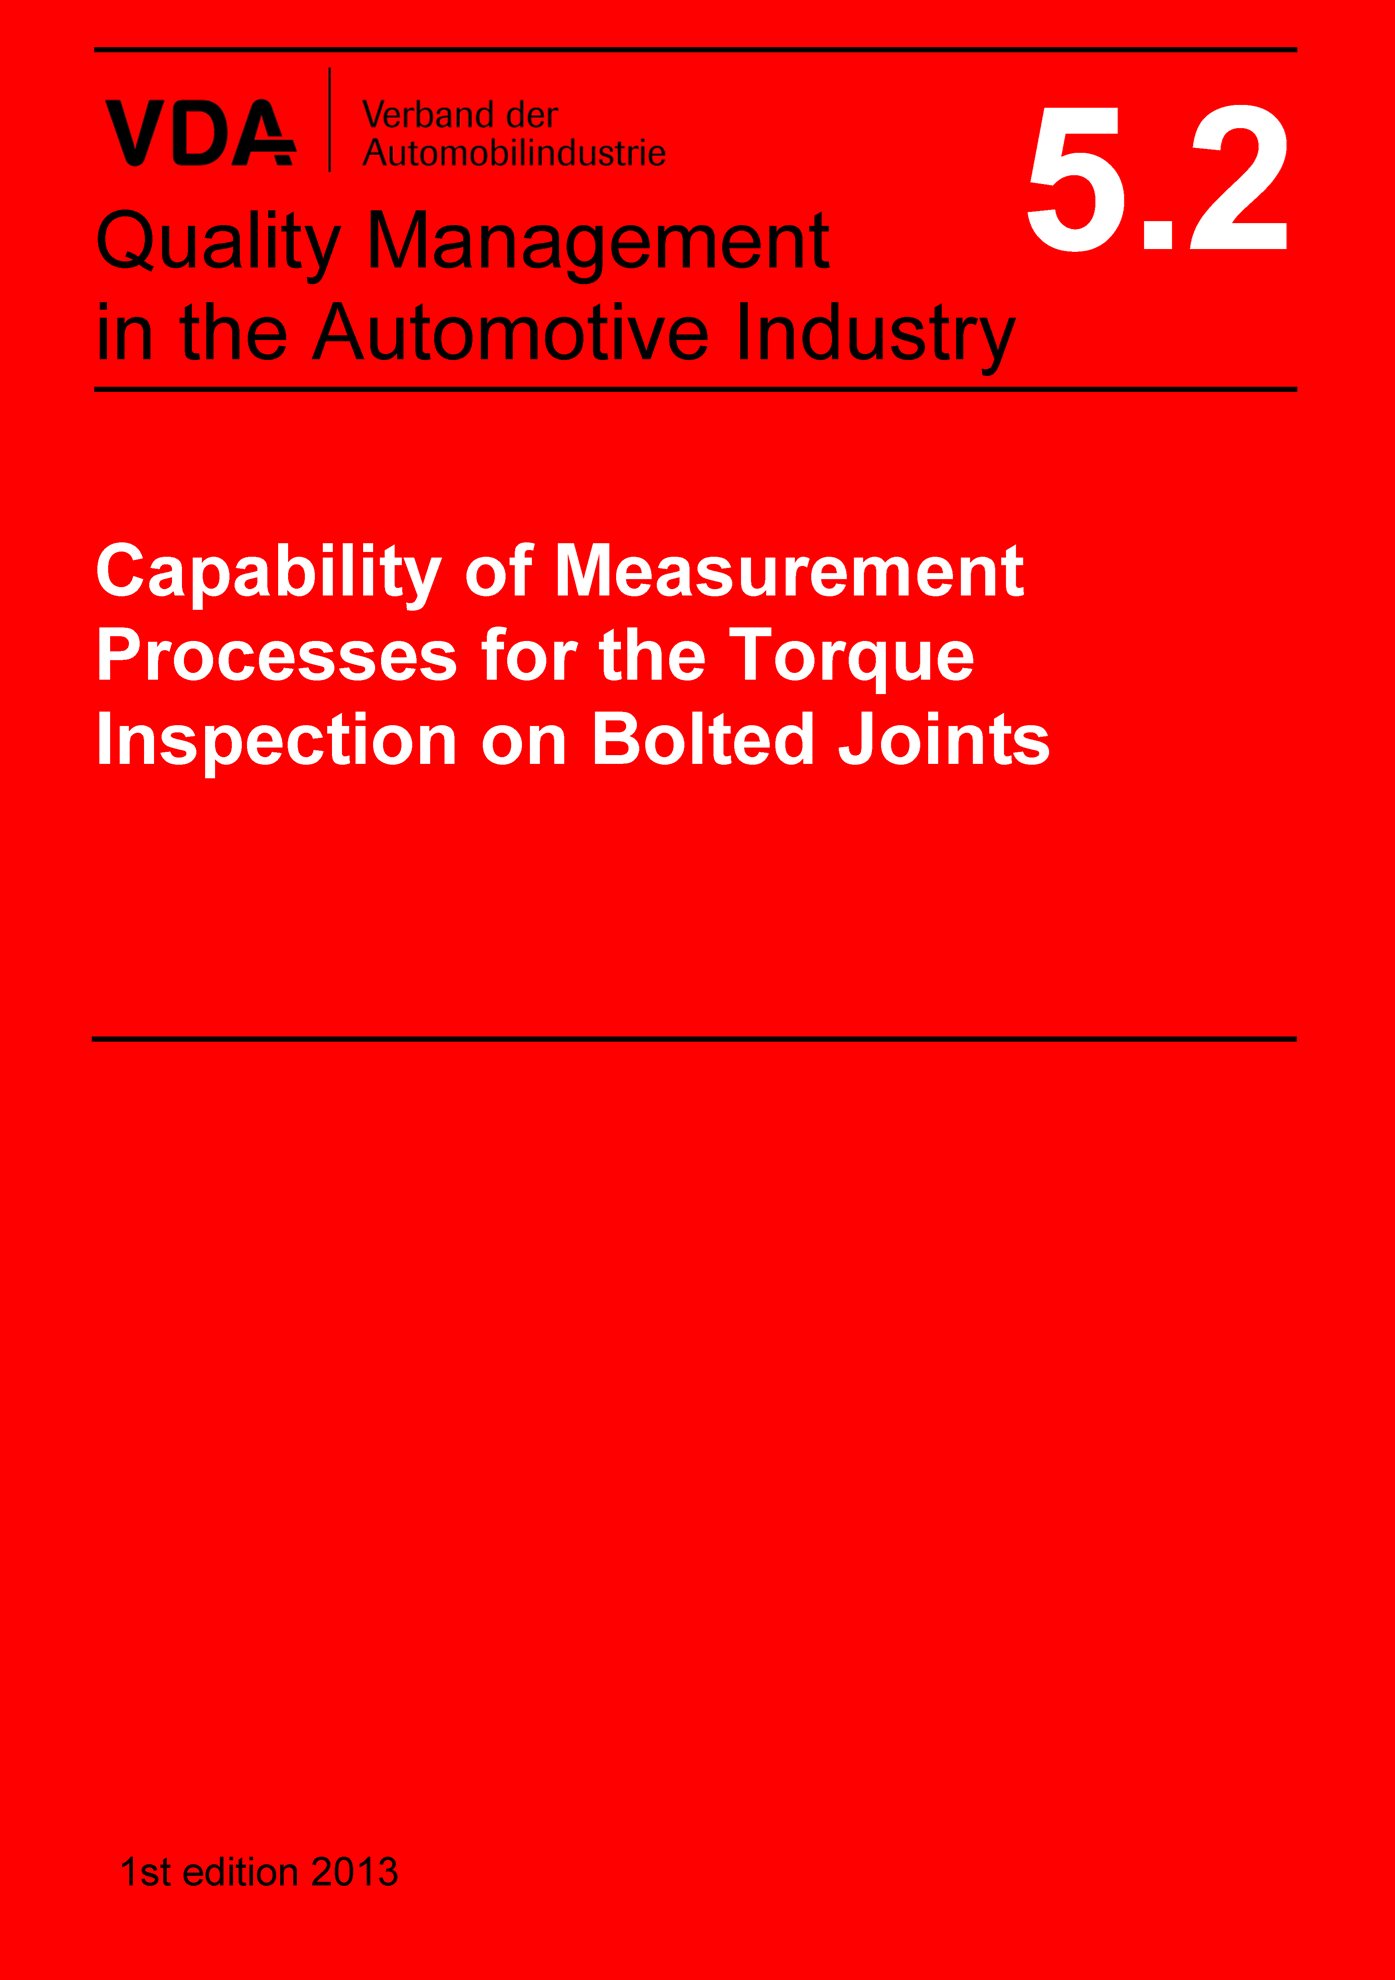 Náhľad  VDA Volume 5.2 - Capability of Measurement
 Processes for the Torque Inspection on Bolted Joints, 1st edition 2013 1.1.2013